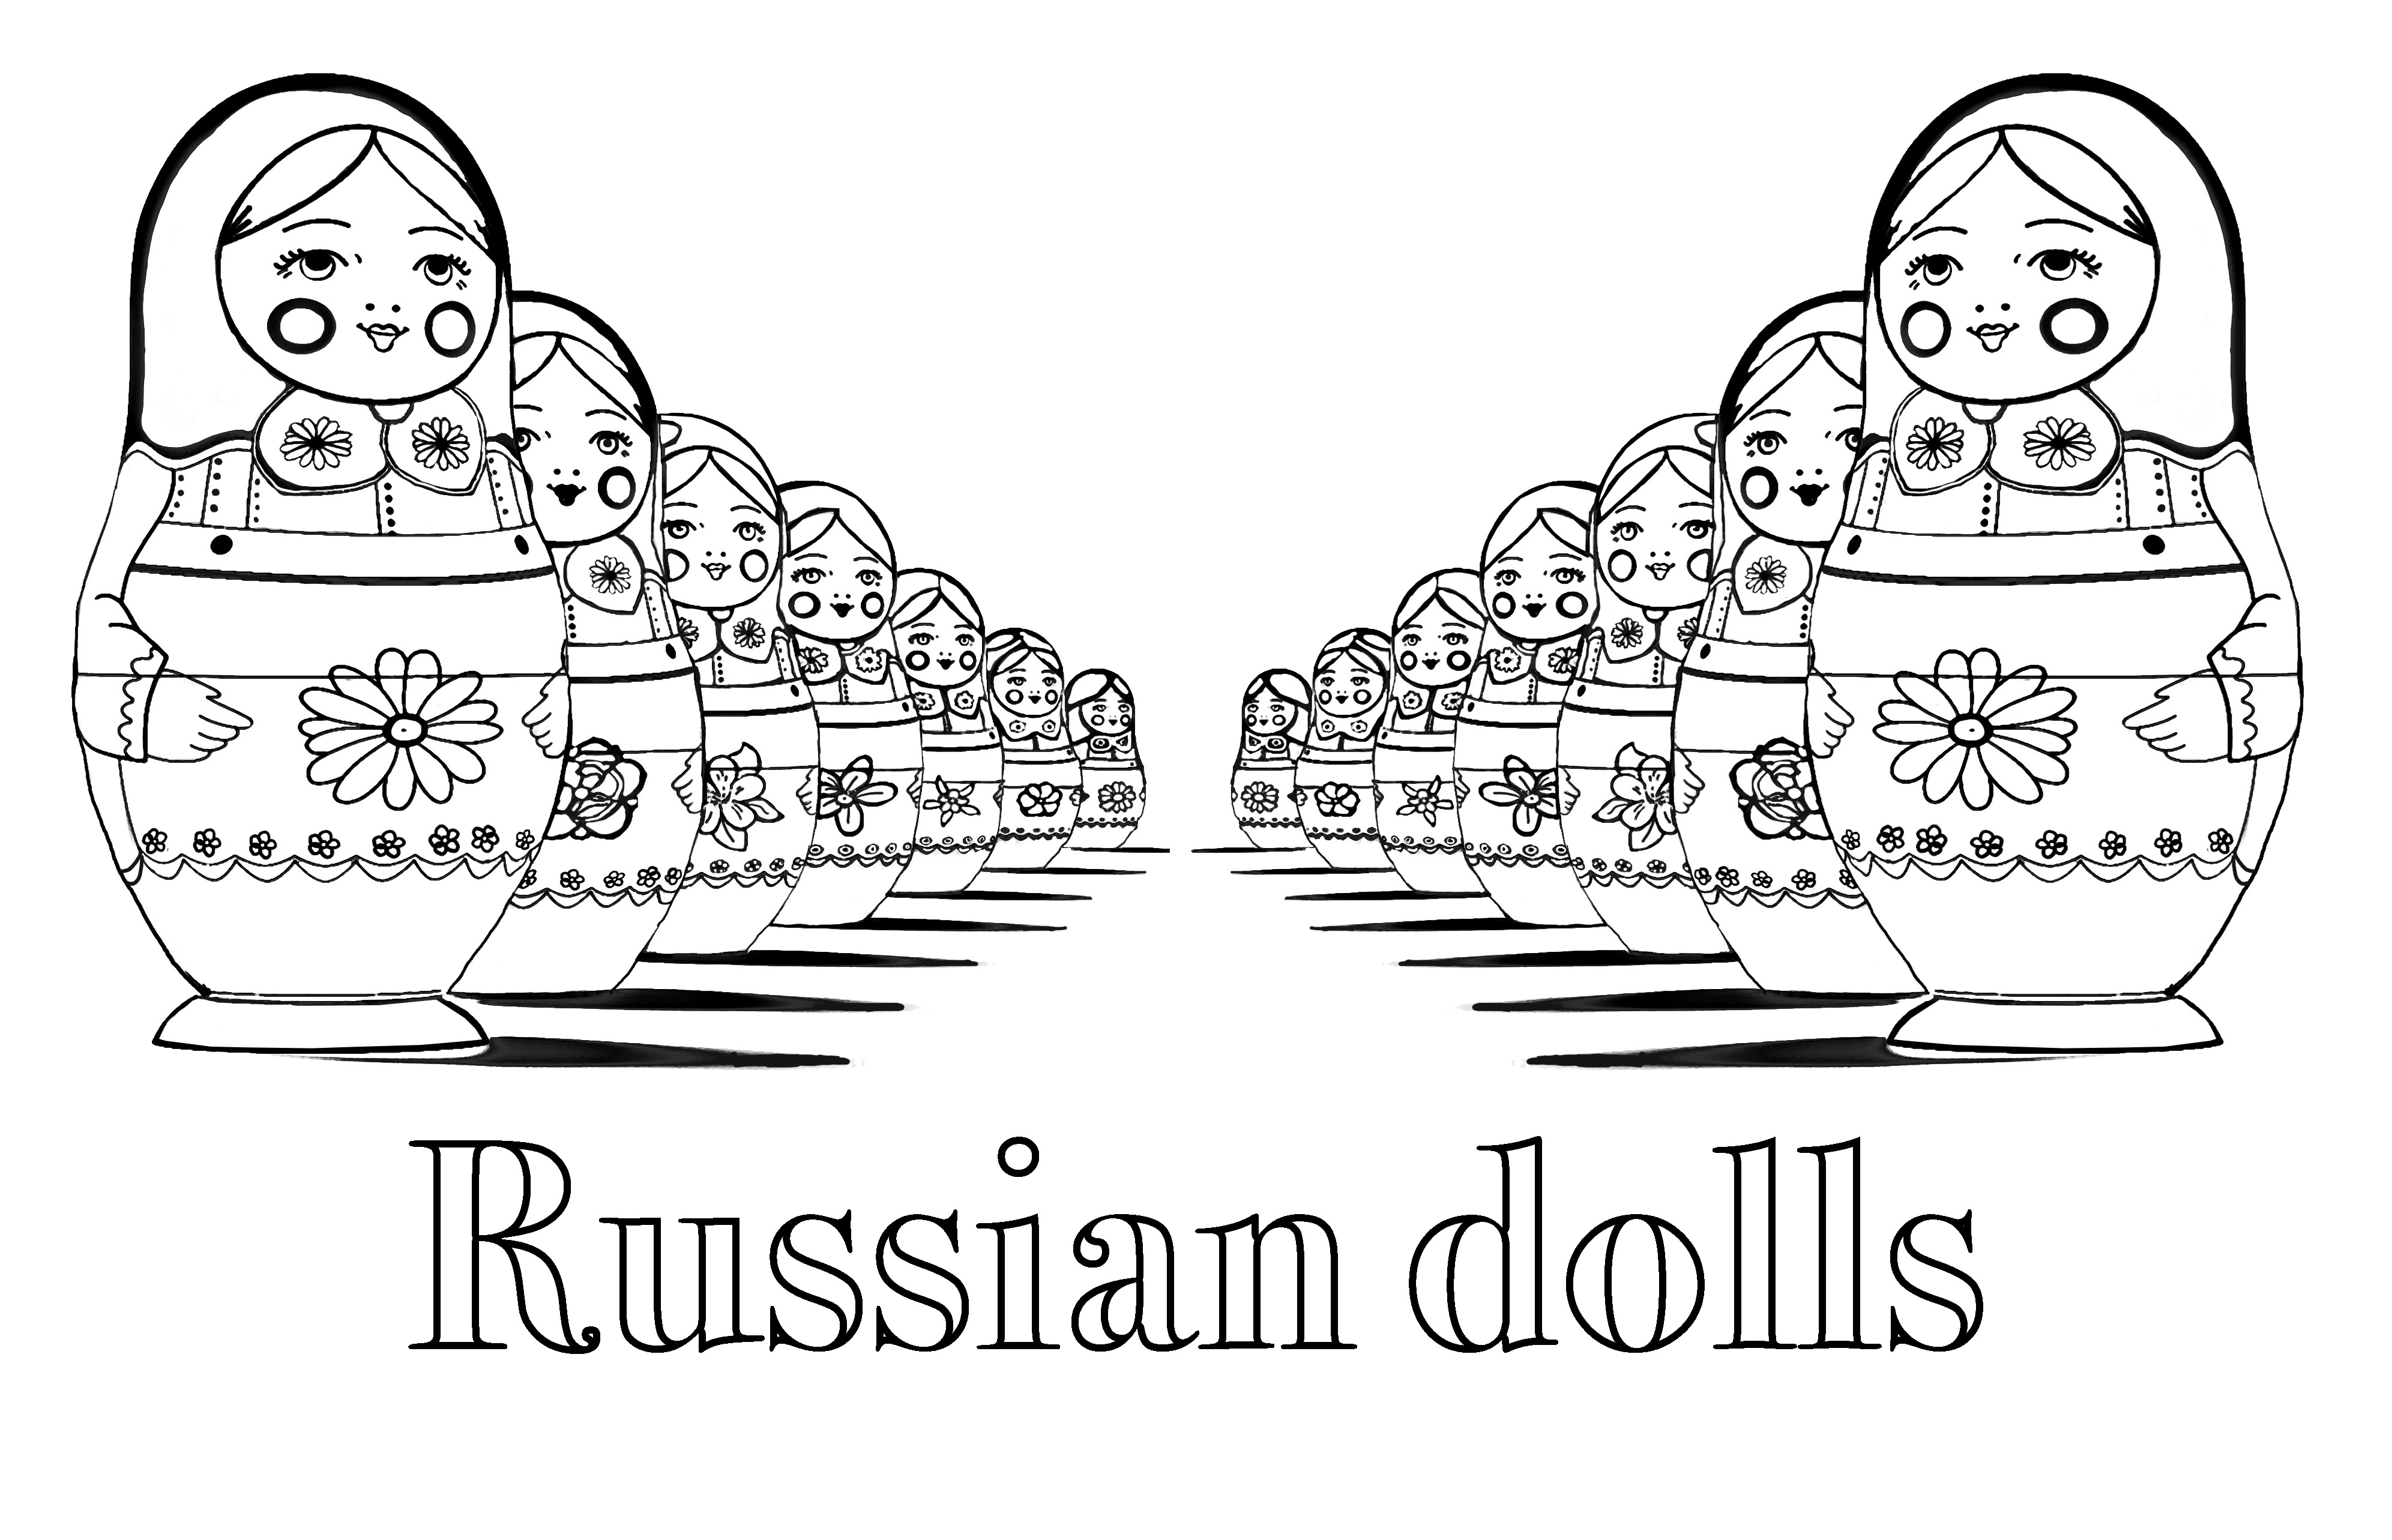 Russian dolls : with perspective effect : Double version with text, Artist : Olivier